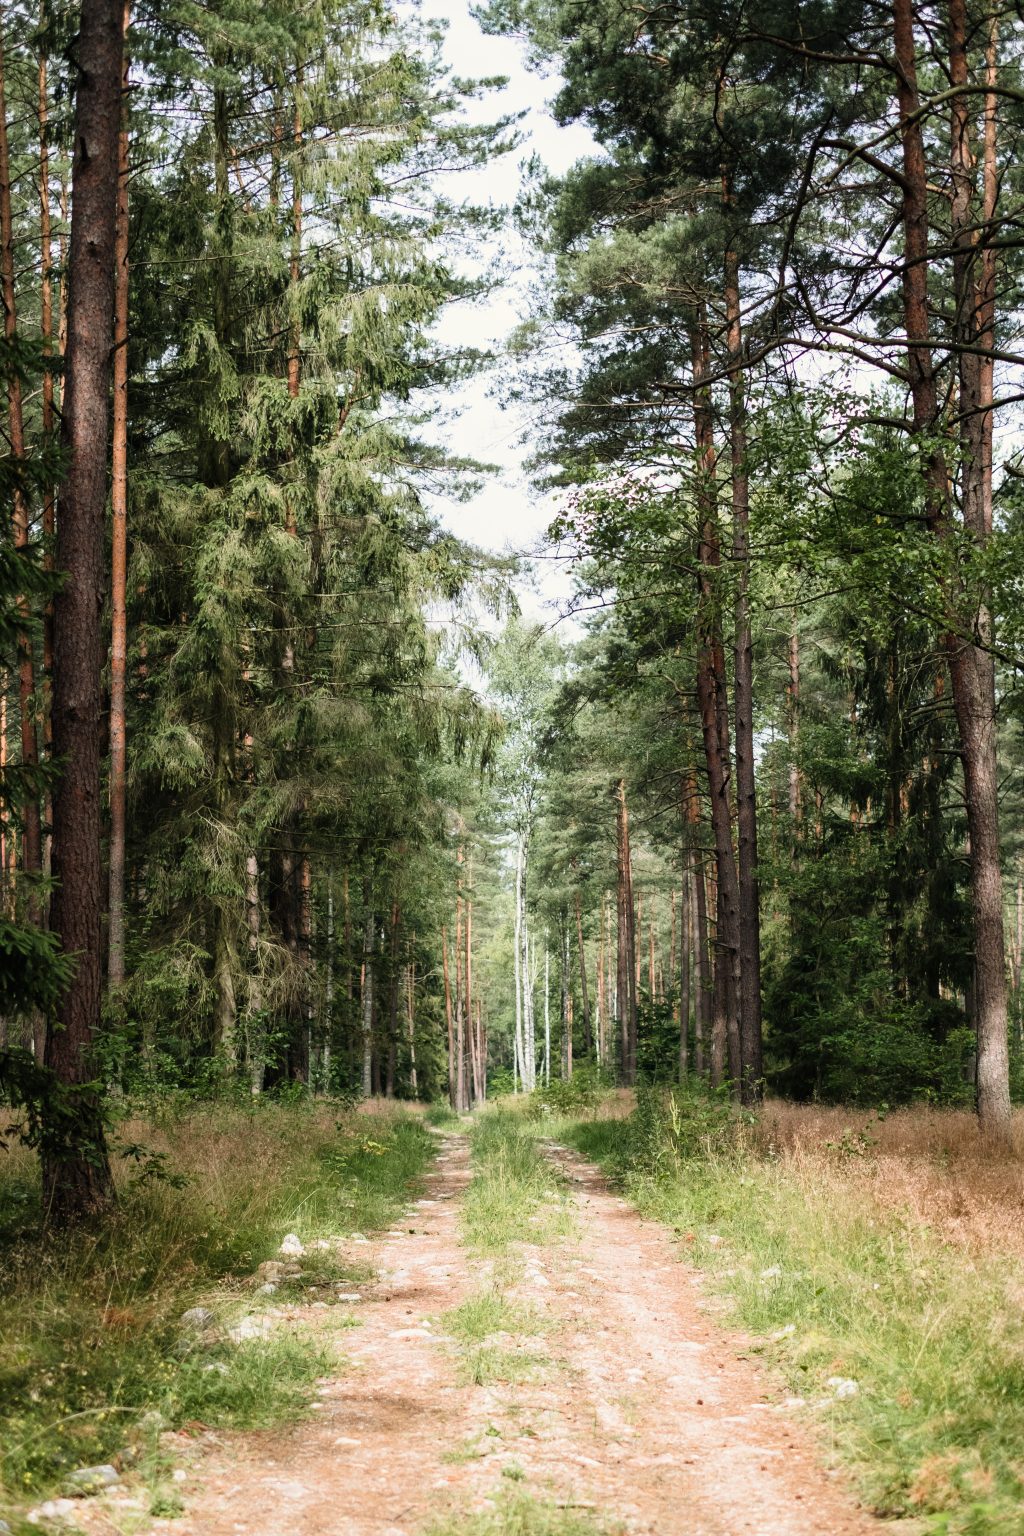 Dirt road leading through the forest - free stock photo